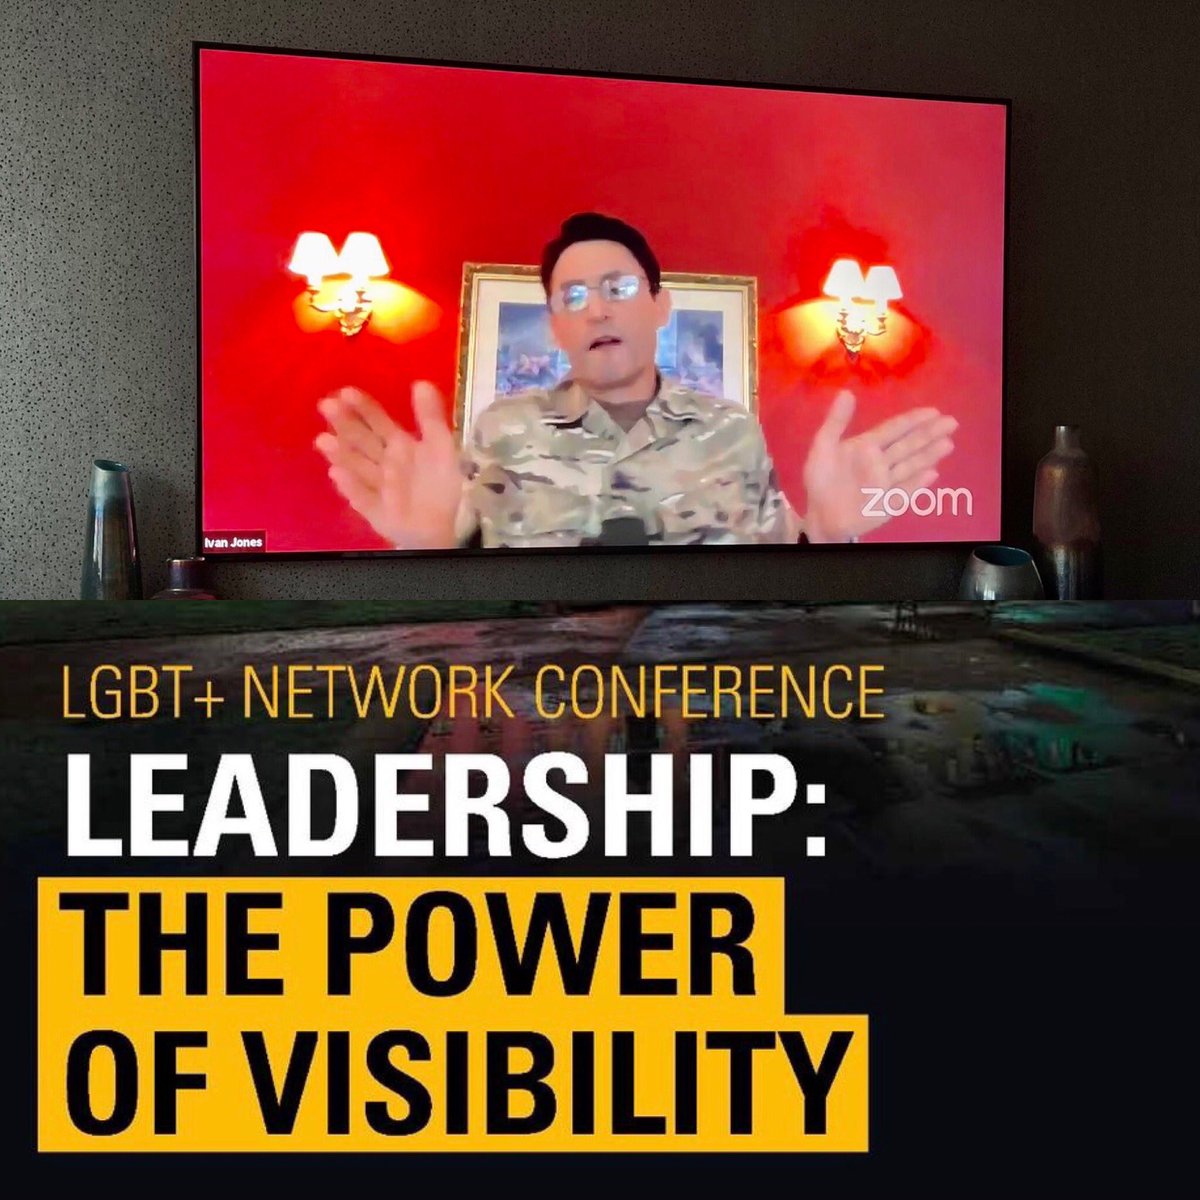 Great to hear Lieutenant General Christopher Tickell CBE, the Army’s LGBT+ Champion, and Lieutenant General Ivan Jones CB, Commander Field Army, introduce the Army LGBT+ Network Conference and the #PowerOfVisibility in #leadership.